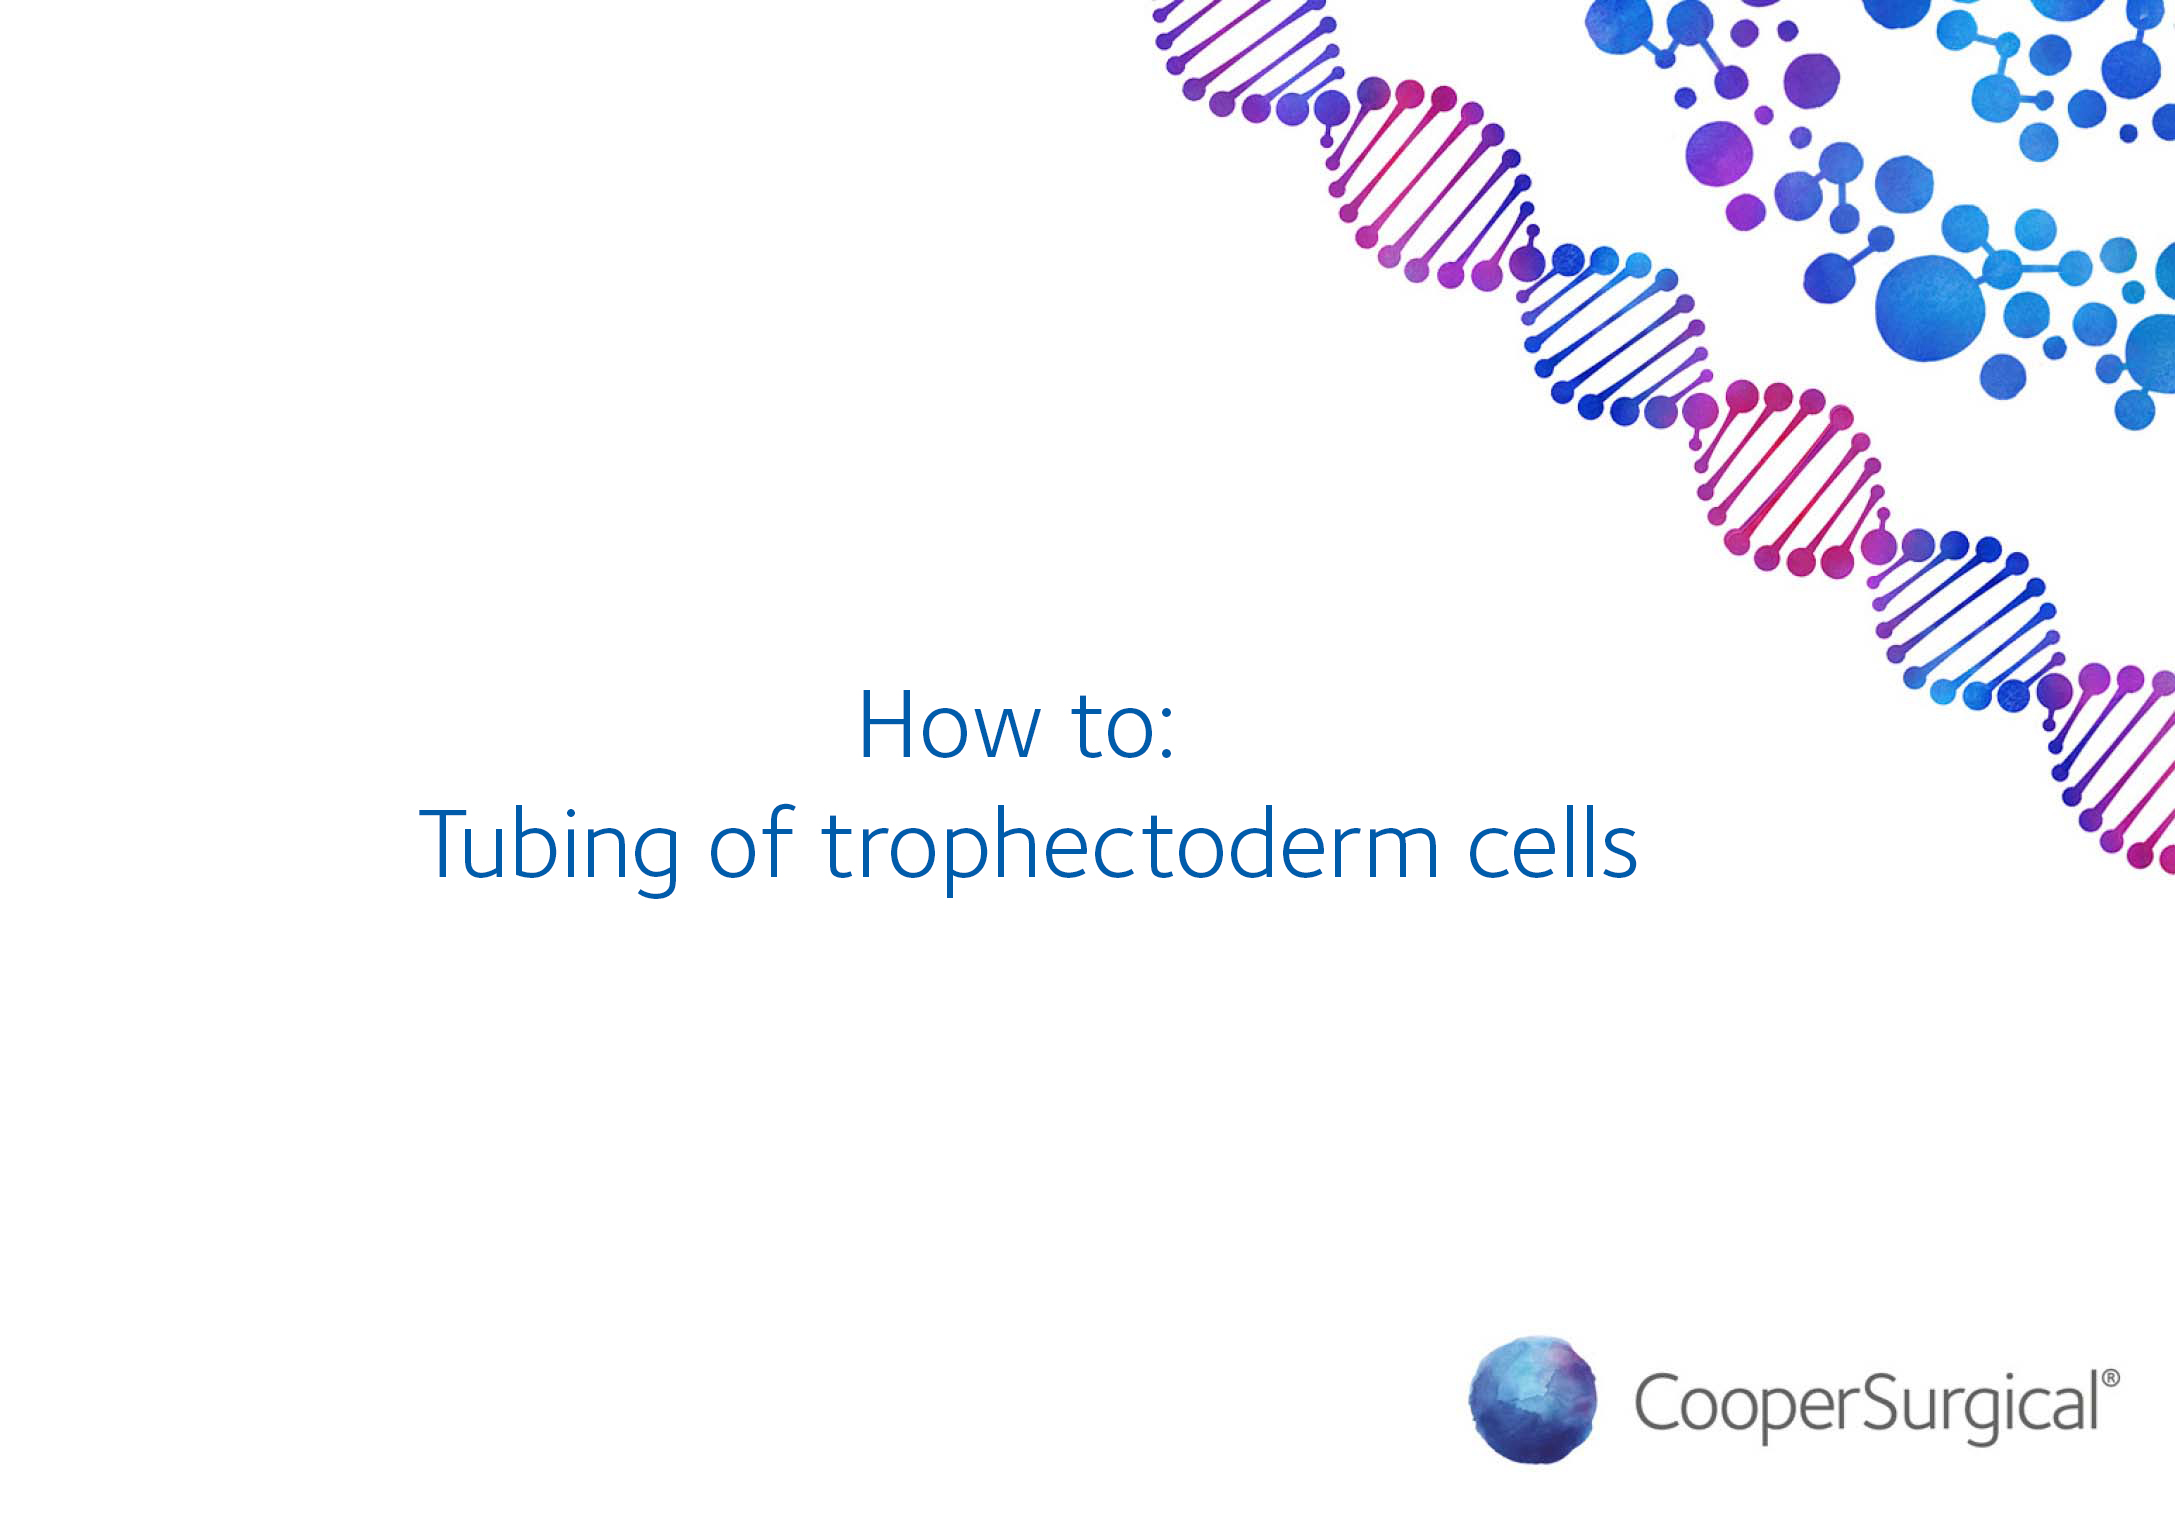 How To Tubing of trophectoderm cells